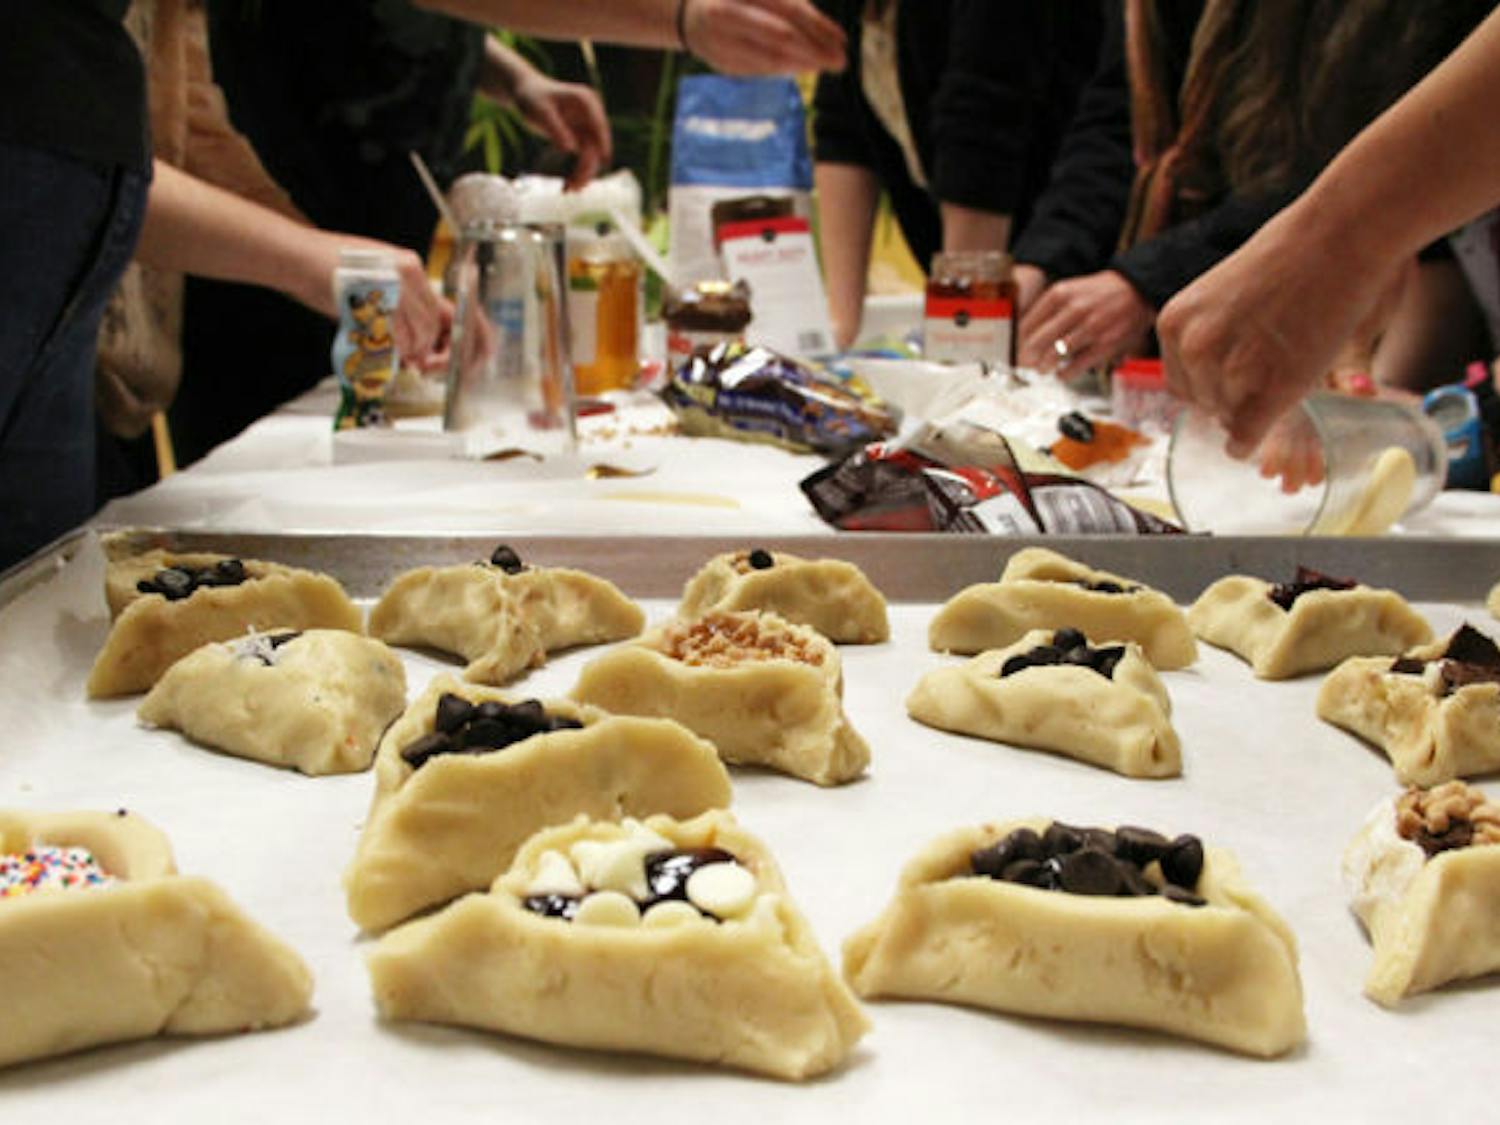 Team Koach prepares hamantaschen in a bake-off at UF Hillel on Wednesday. The cookies are filled with fruit, chocolate or other ingredients.